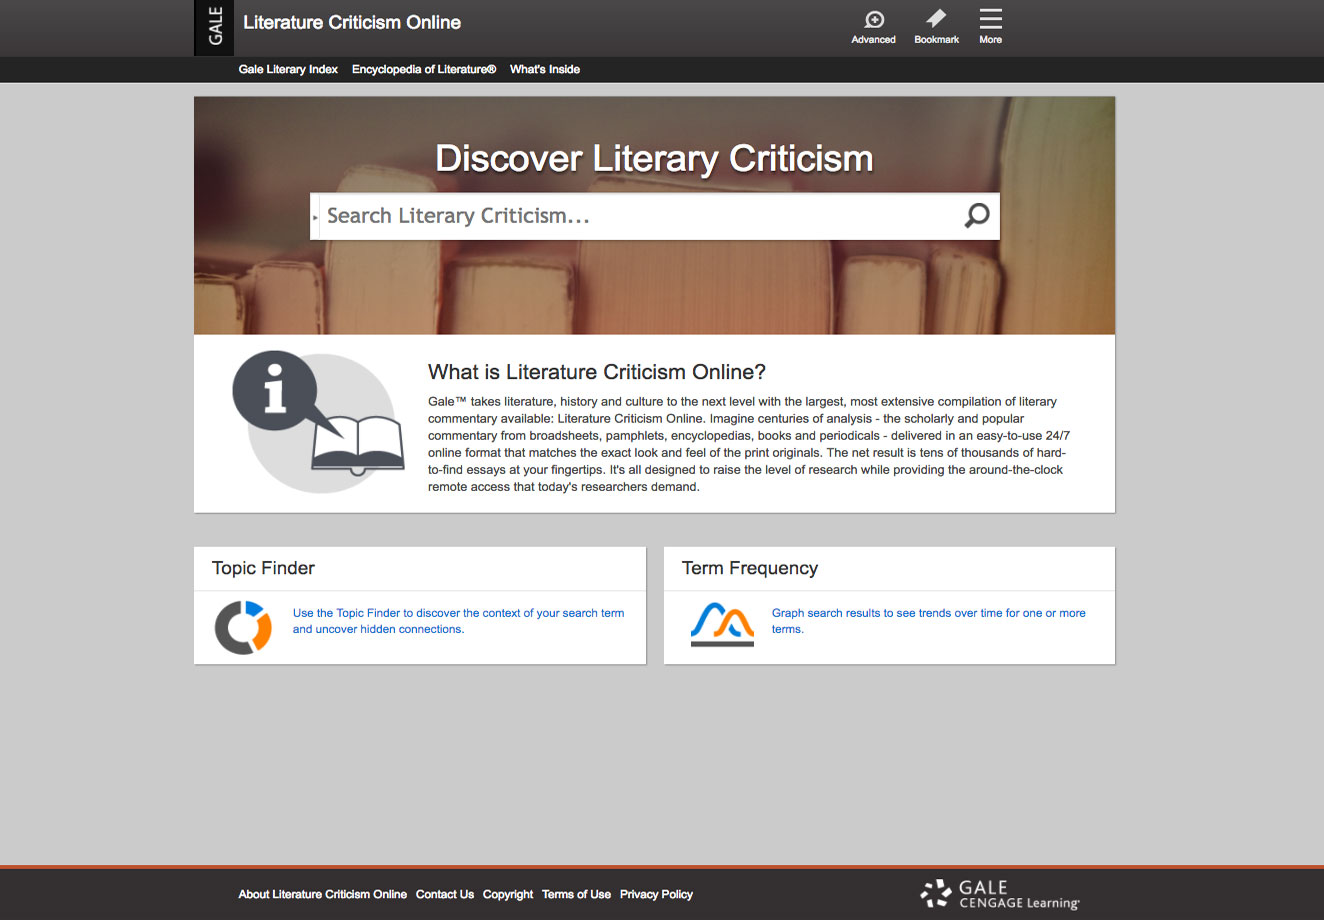 The Literature Criticism Online home page screenshot.